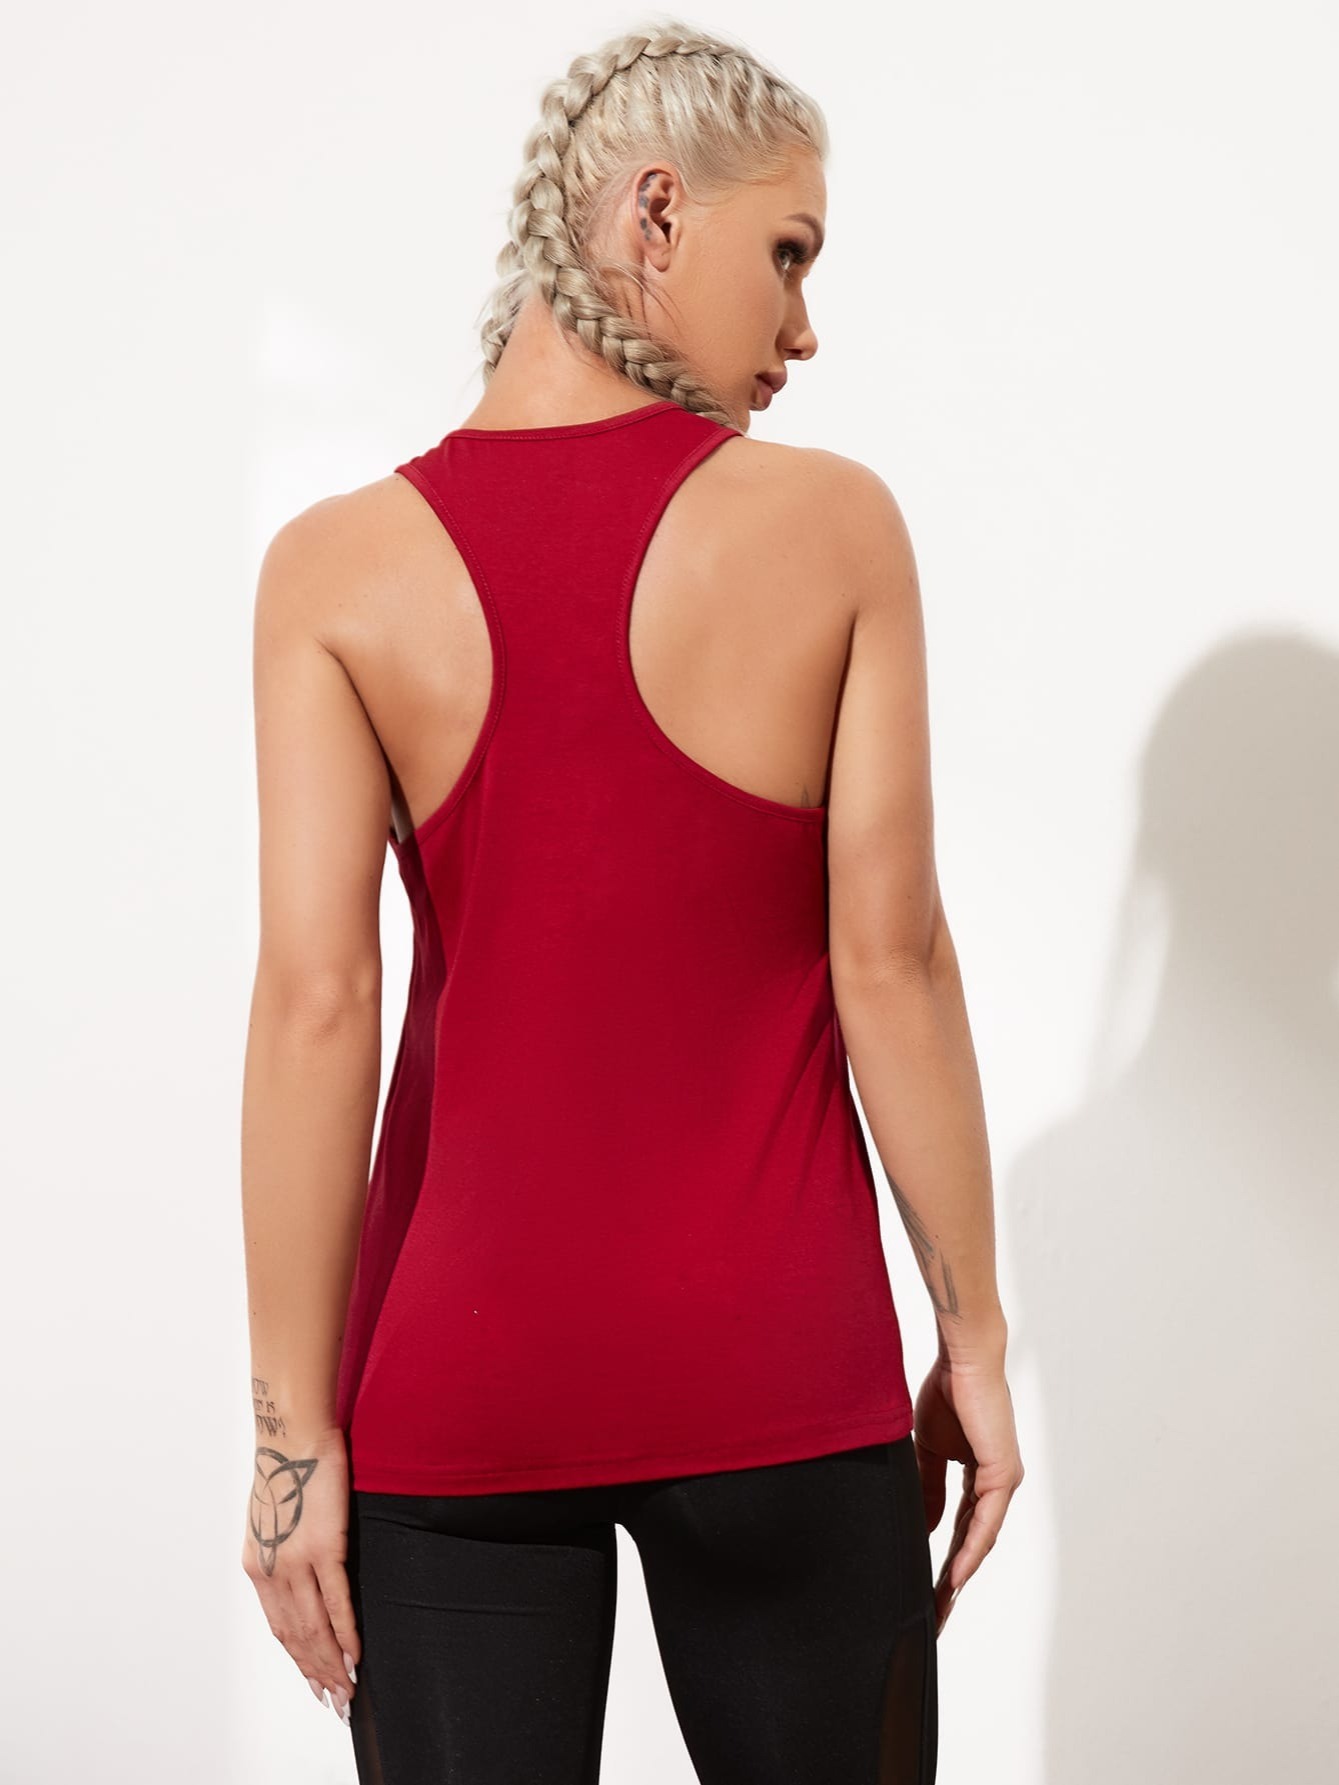 Yoga Tops Activewear Workout Clothes Sports Racerback Style Tank